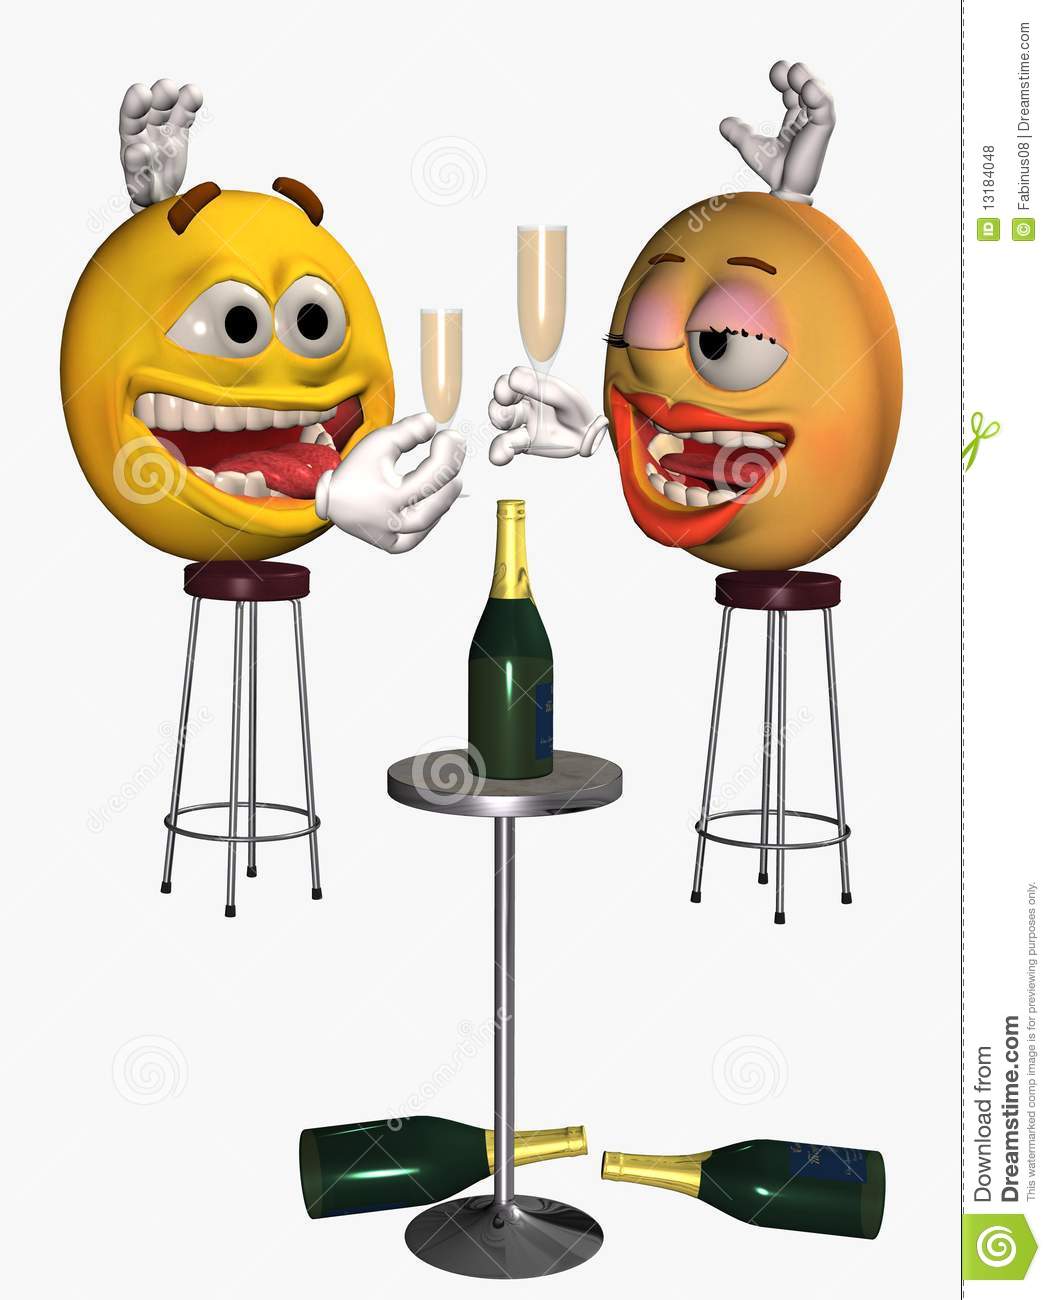 Free Stock Photos  Smiley Face Couple Drinking  Image  13184048